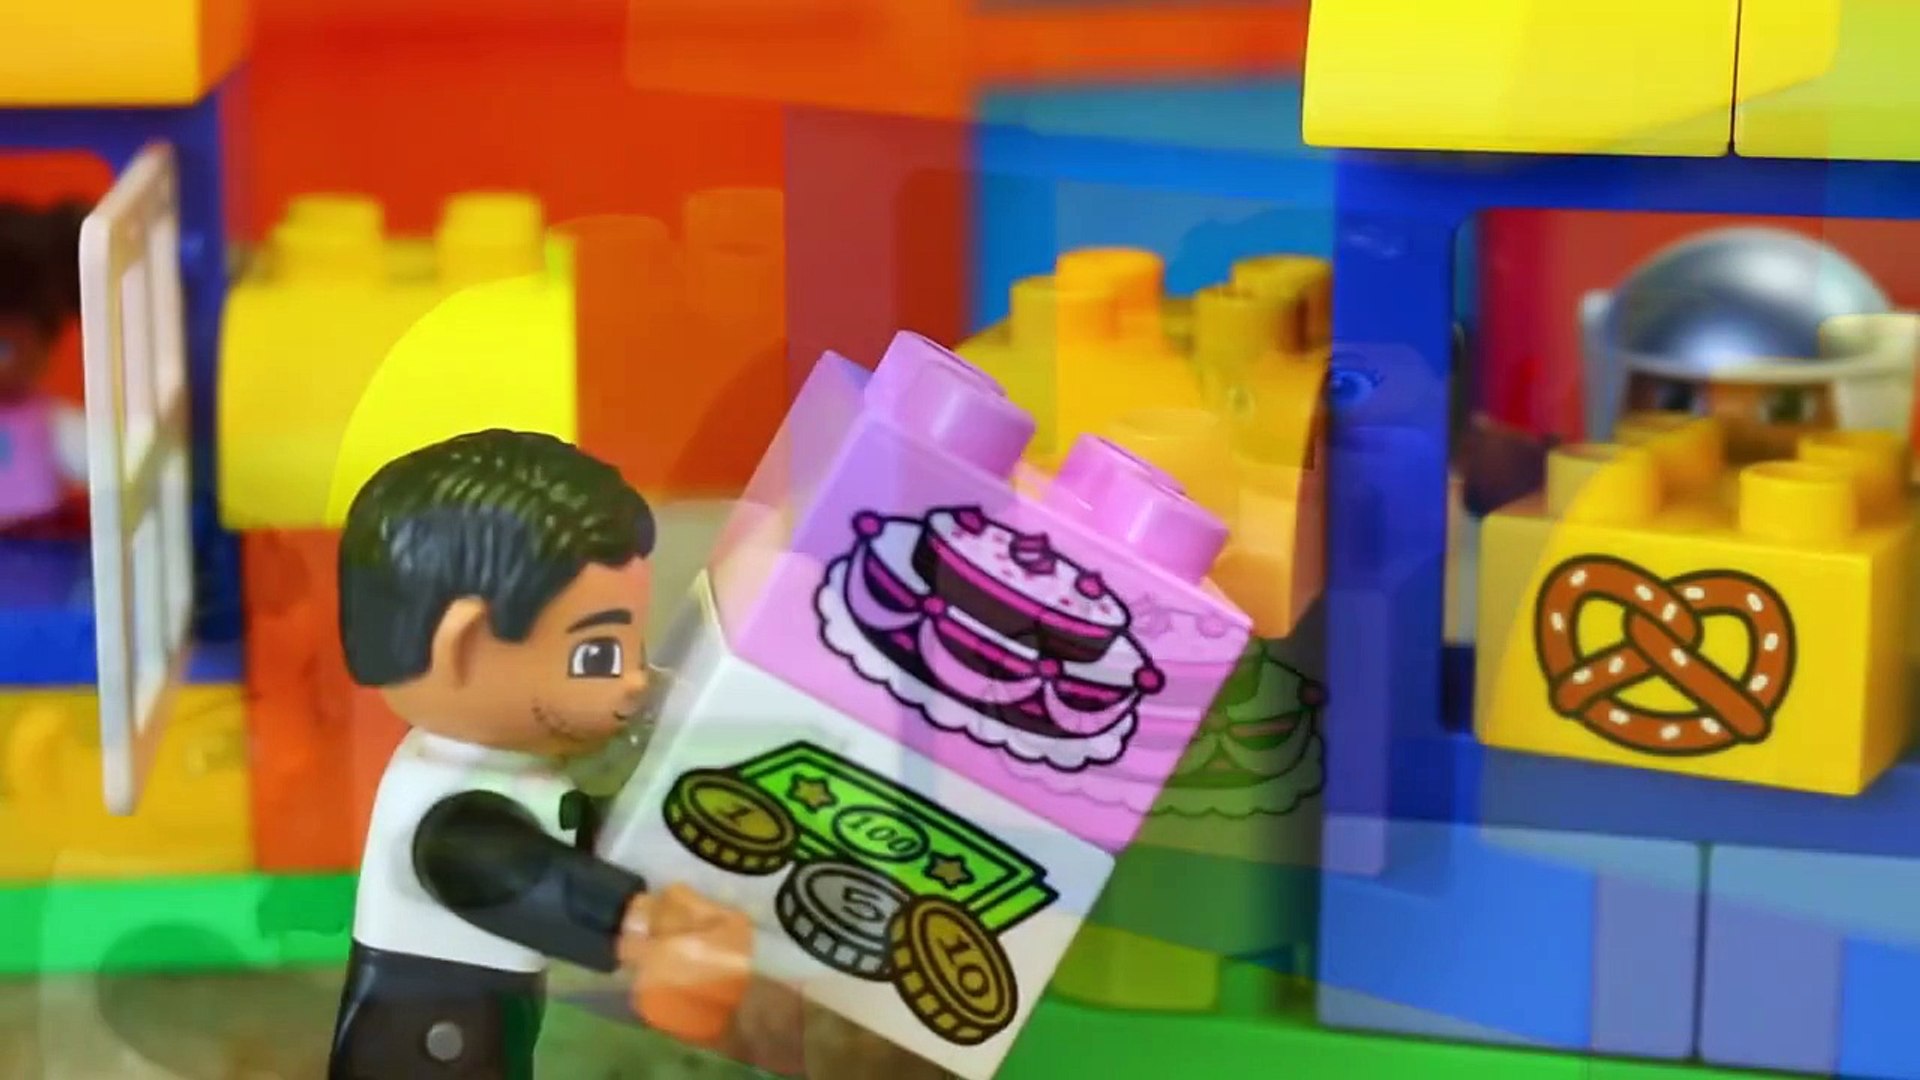 Duplo Lego Batman and a Police Officer Jail Twin Lego Bank Robbers Stealing  Money and Cake - Dailymotion Video